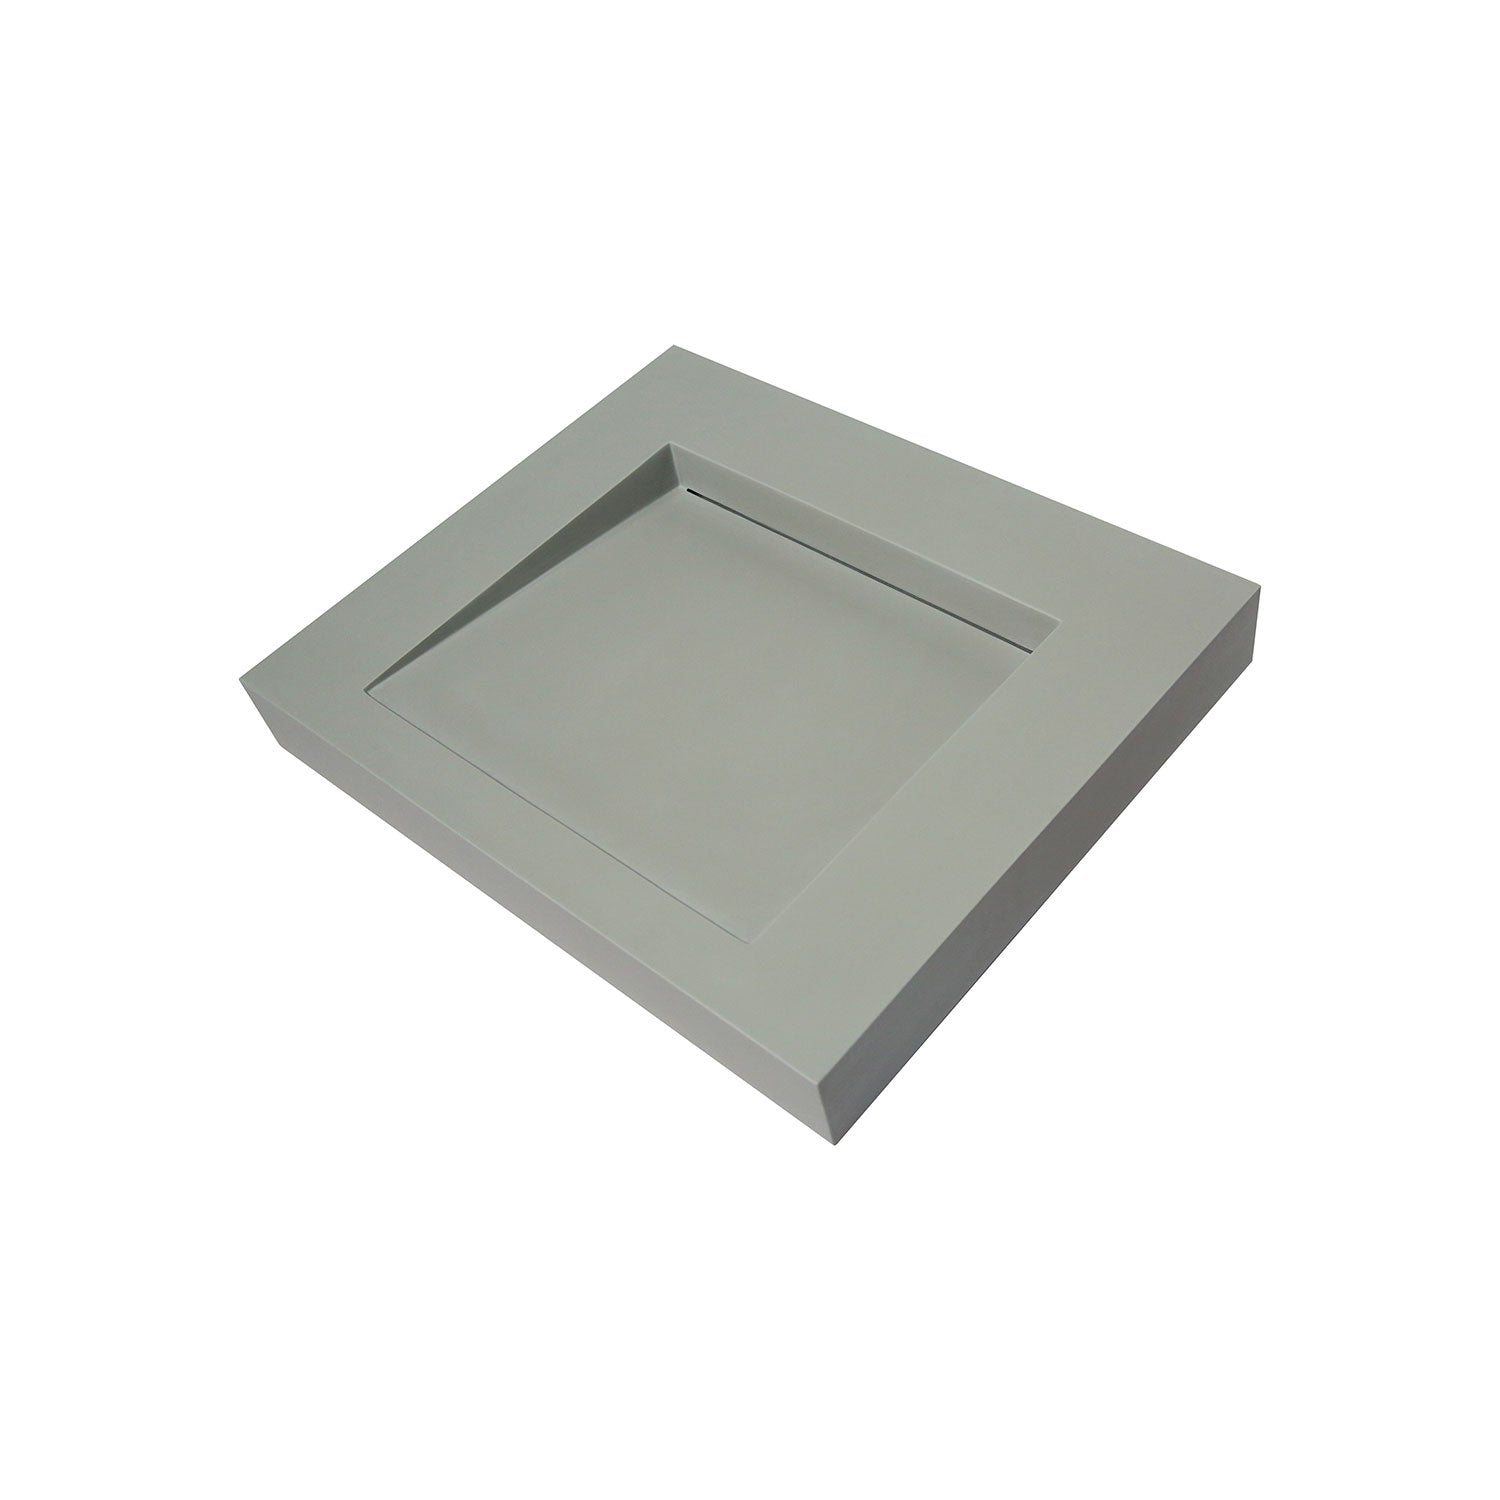 DAX Solid Surface Rectangle Single Bowl Top Mount Bathroom Sink,  23-1/4 x 19-5/16 x 3-1/8 Inches (DAX-AB-1330)